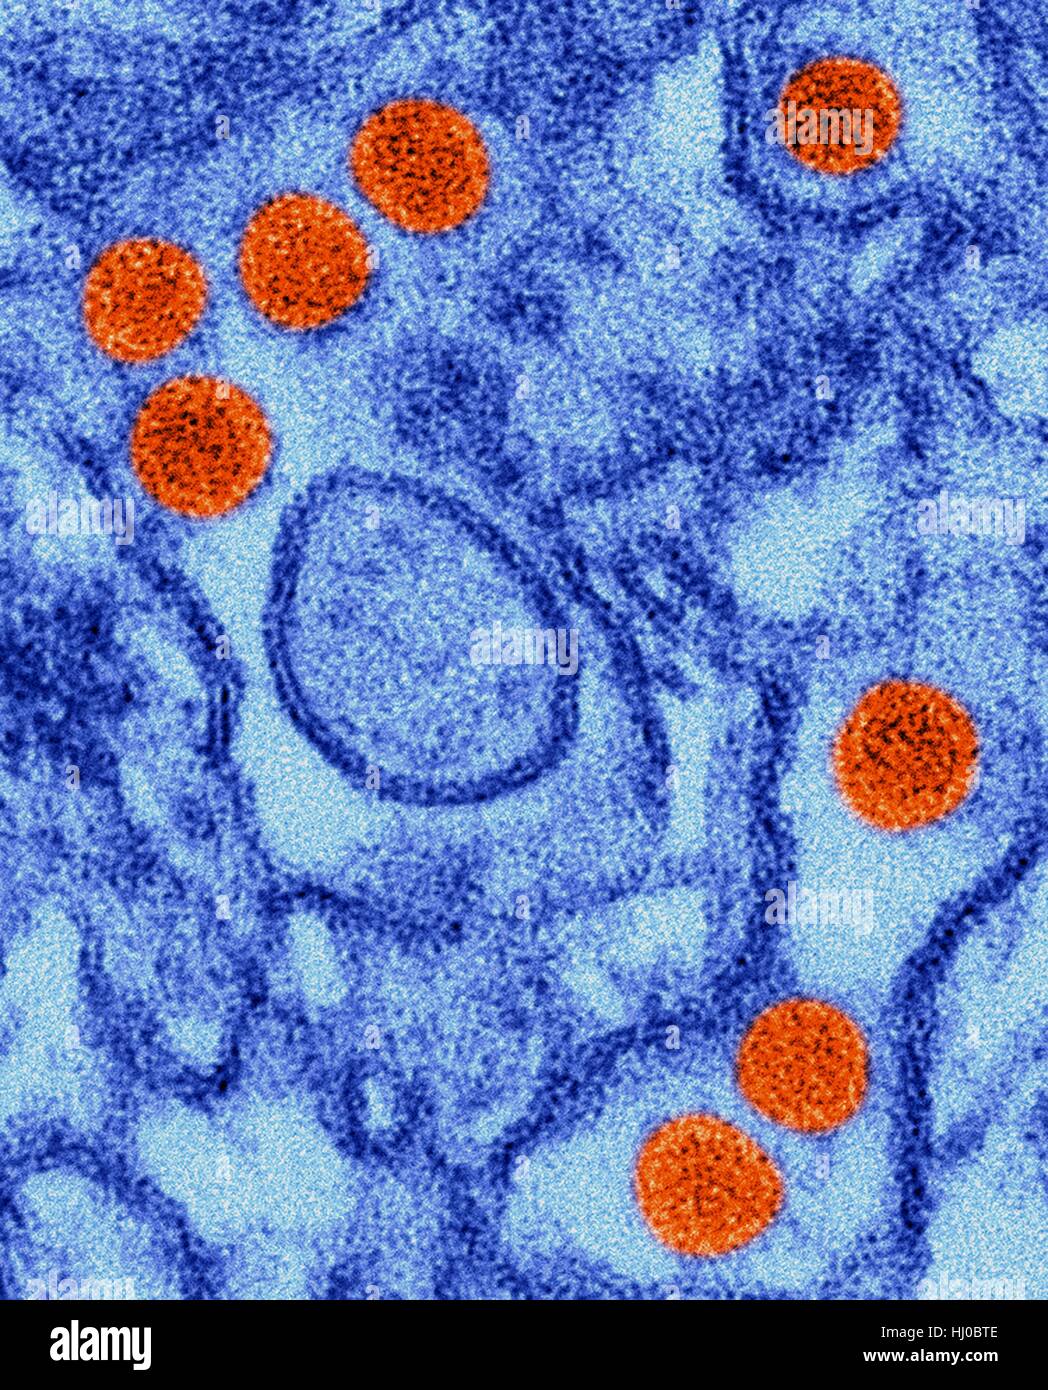 Coloured transmission electron micrograph (TEM) of Zika virus particles (orange) isolated in kidney epithelial cells (Vero E6 cells).Zika viruses have dense core surrounded by envelope (40nm size).Zika virus is RNA (ribonucleic acid) virus in family Flaviviridae causes Zika fever,or Zika Stock Photo